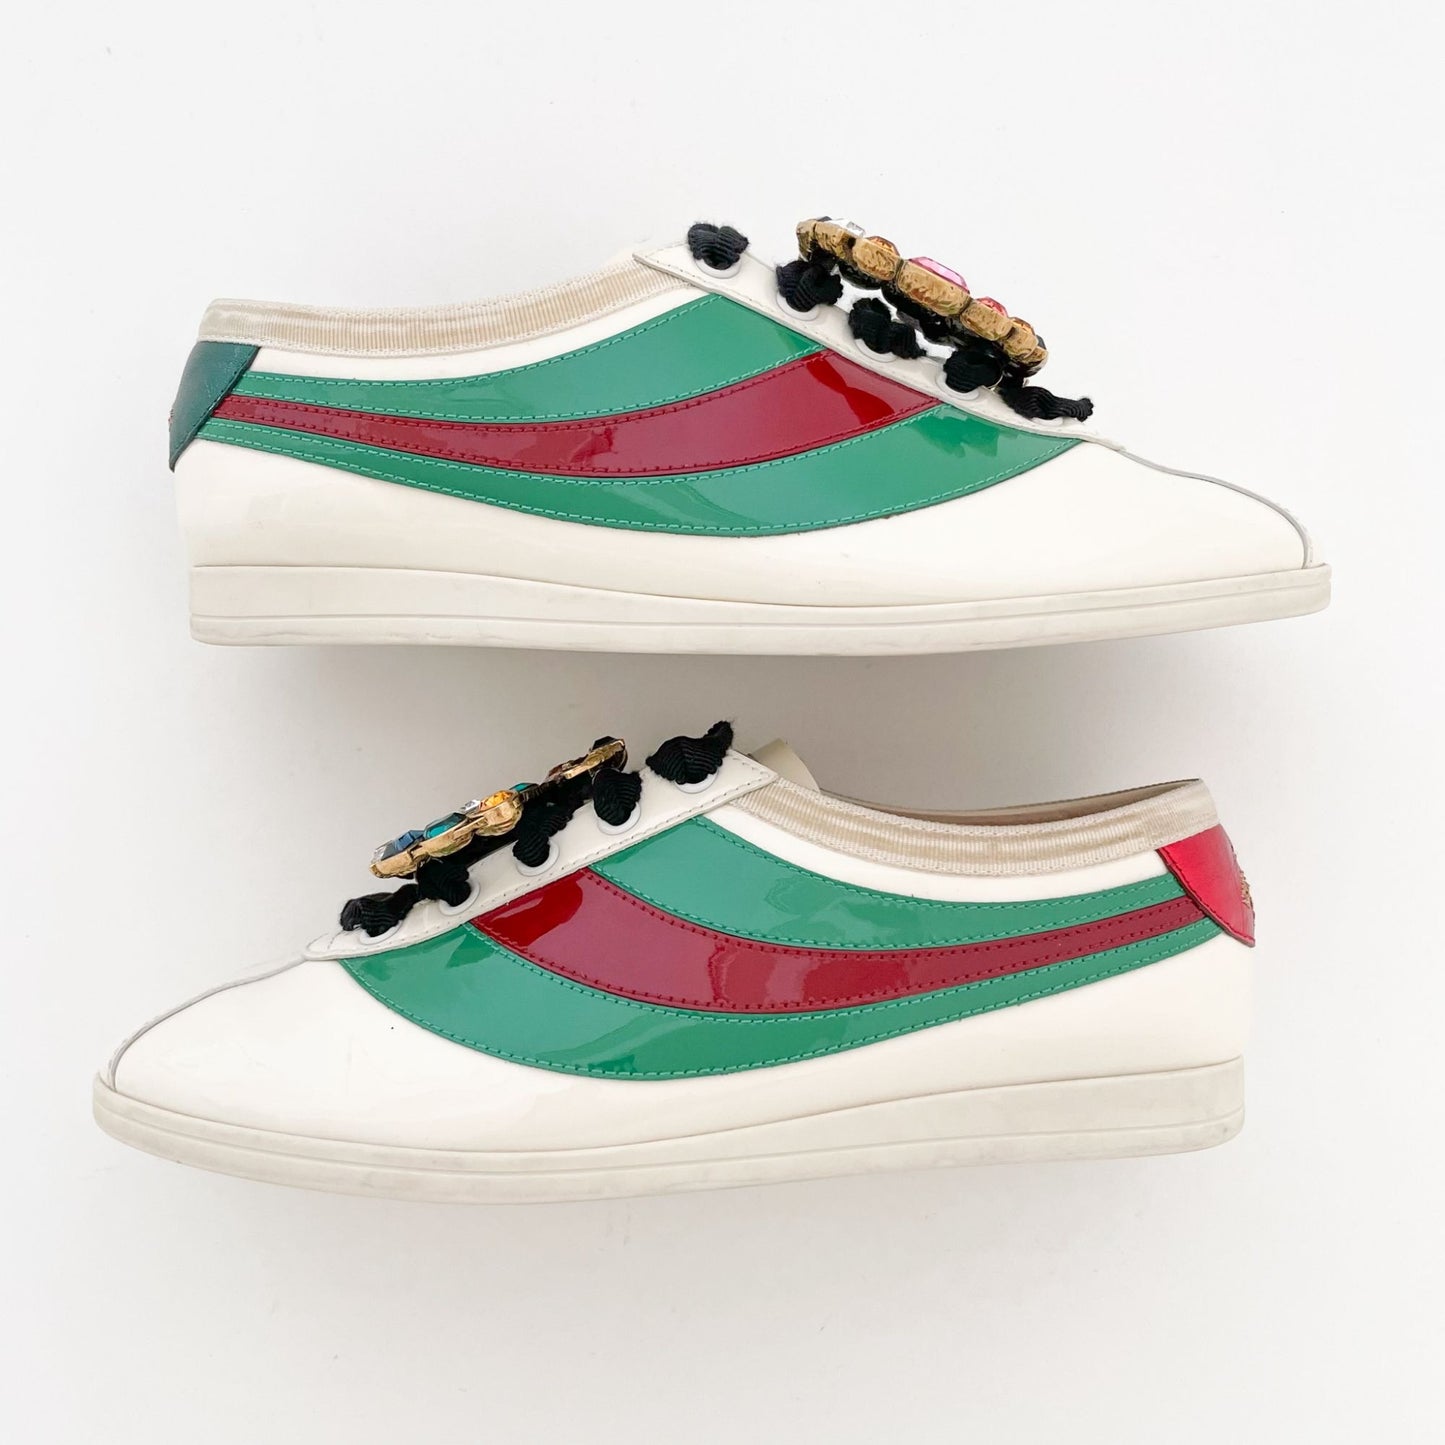 Gucci Falacer GG Vernice Crystal Sneakers in Cream Patent Leather Size 36